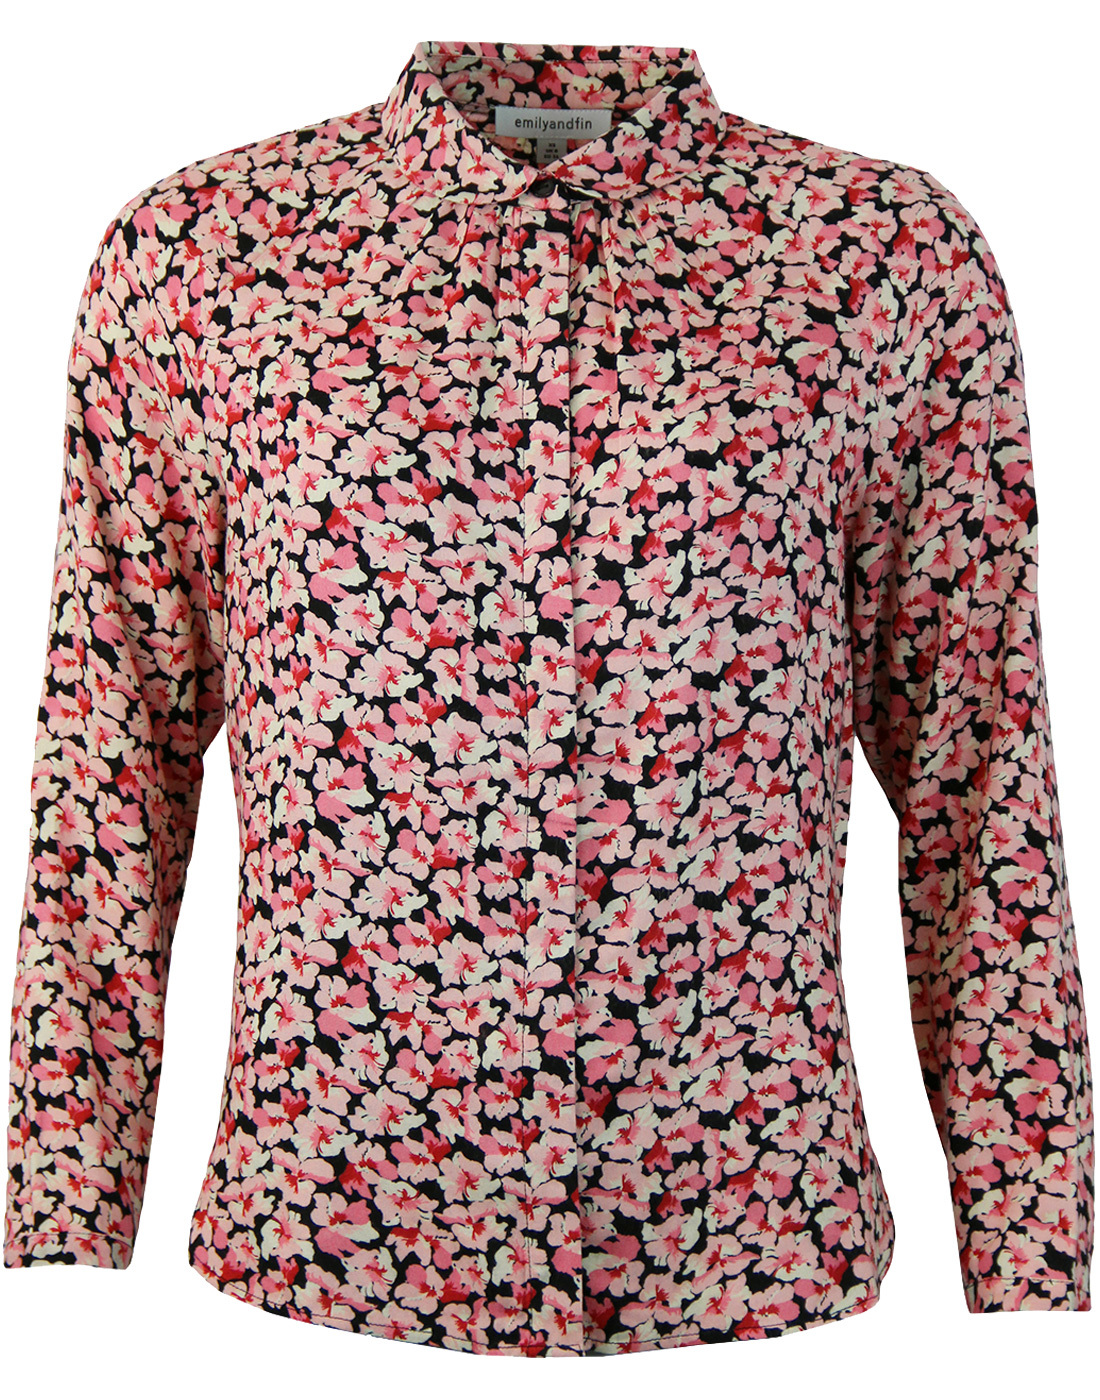 EMILY AND FIN Katie Womens Retro 60s Floral Shirt in Pink/Black